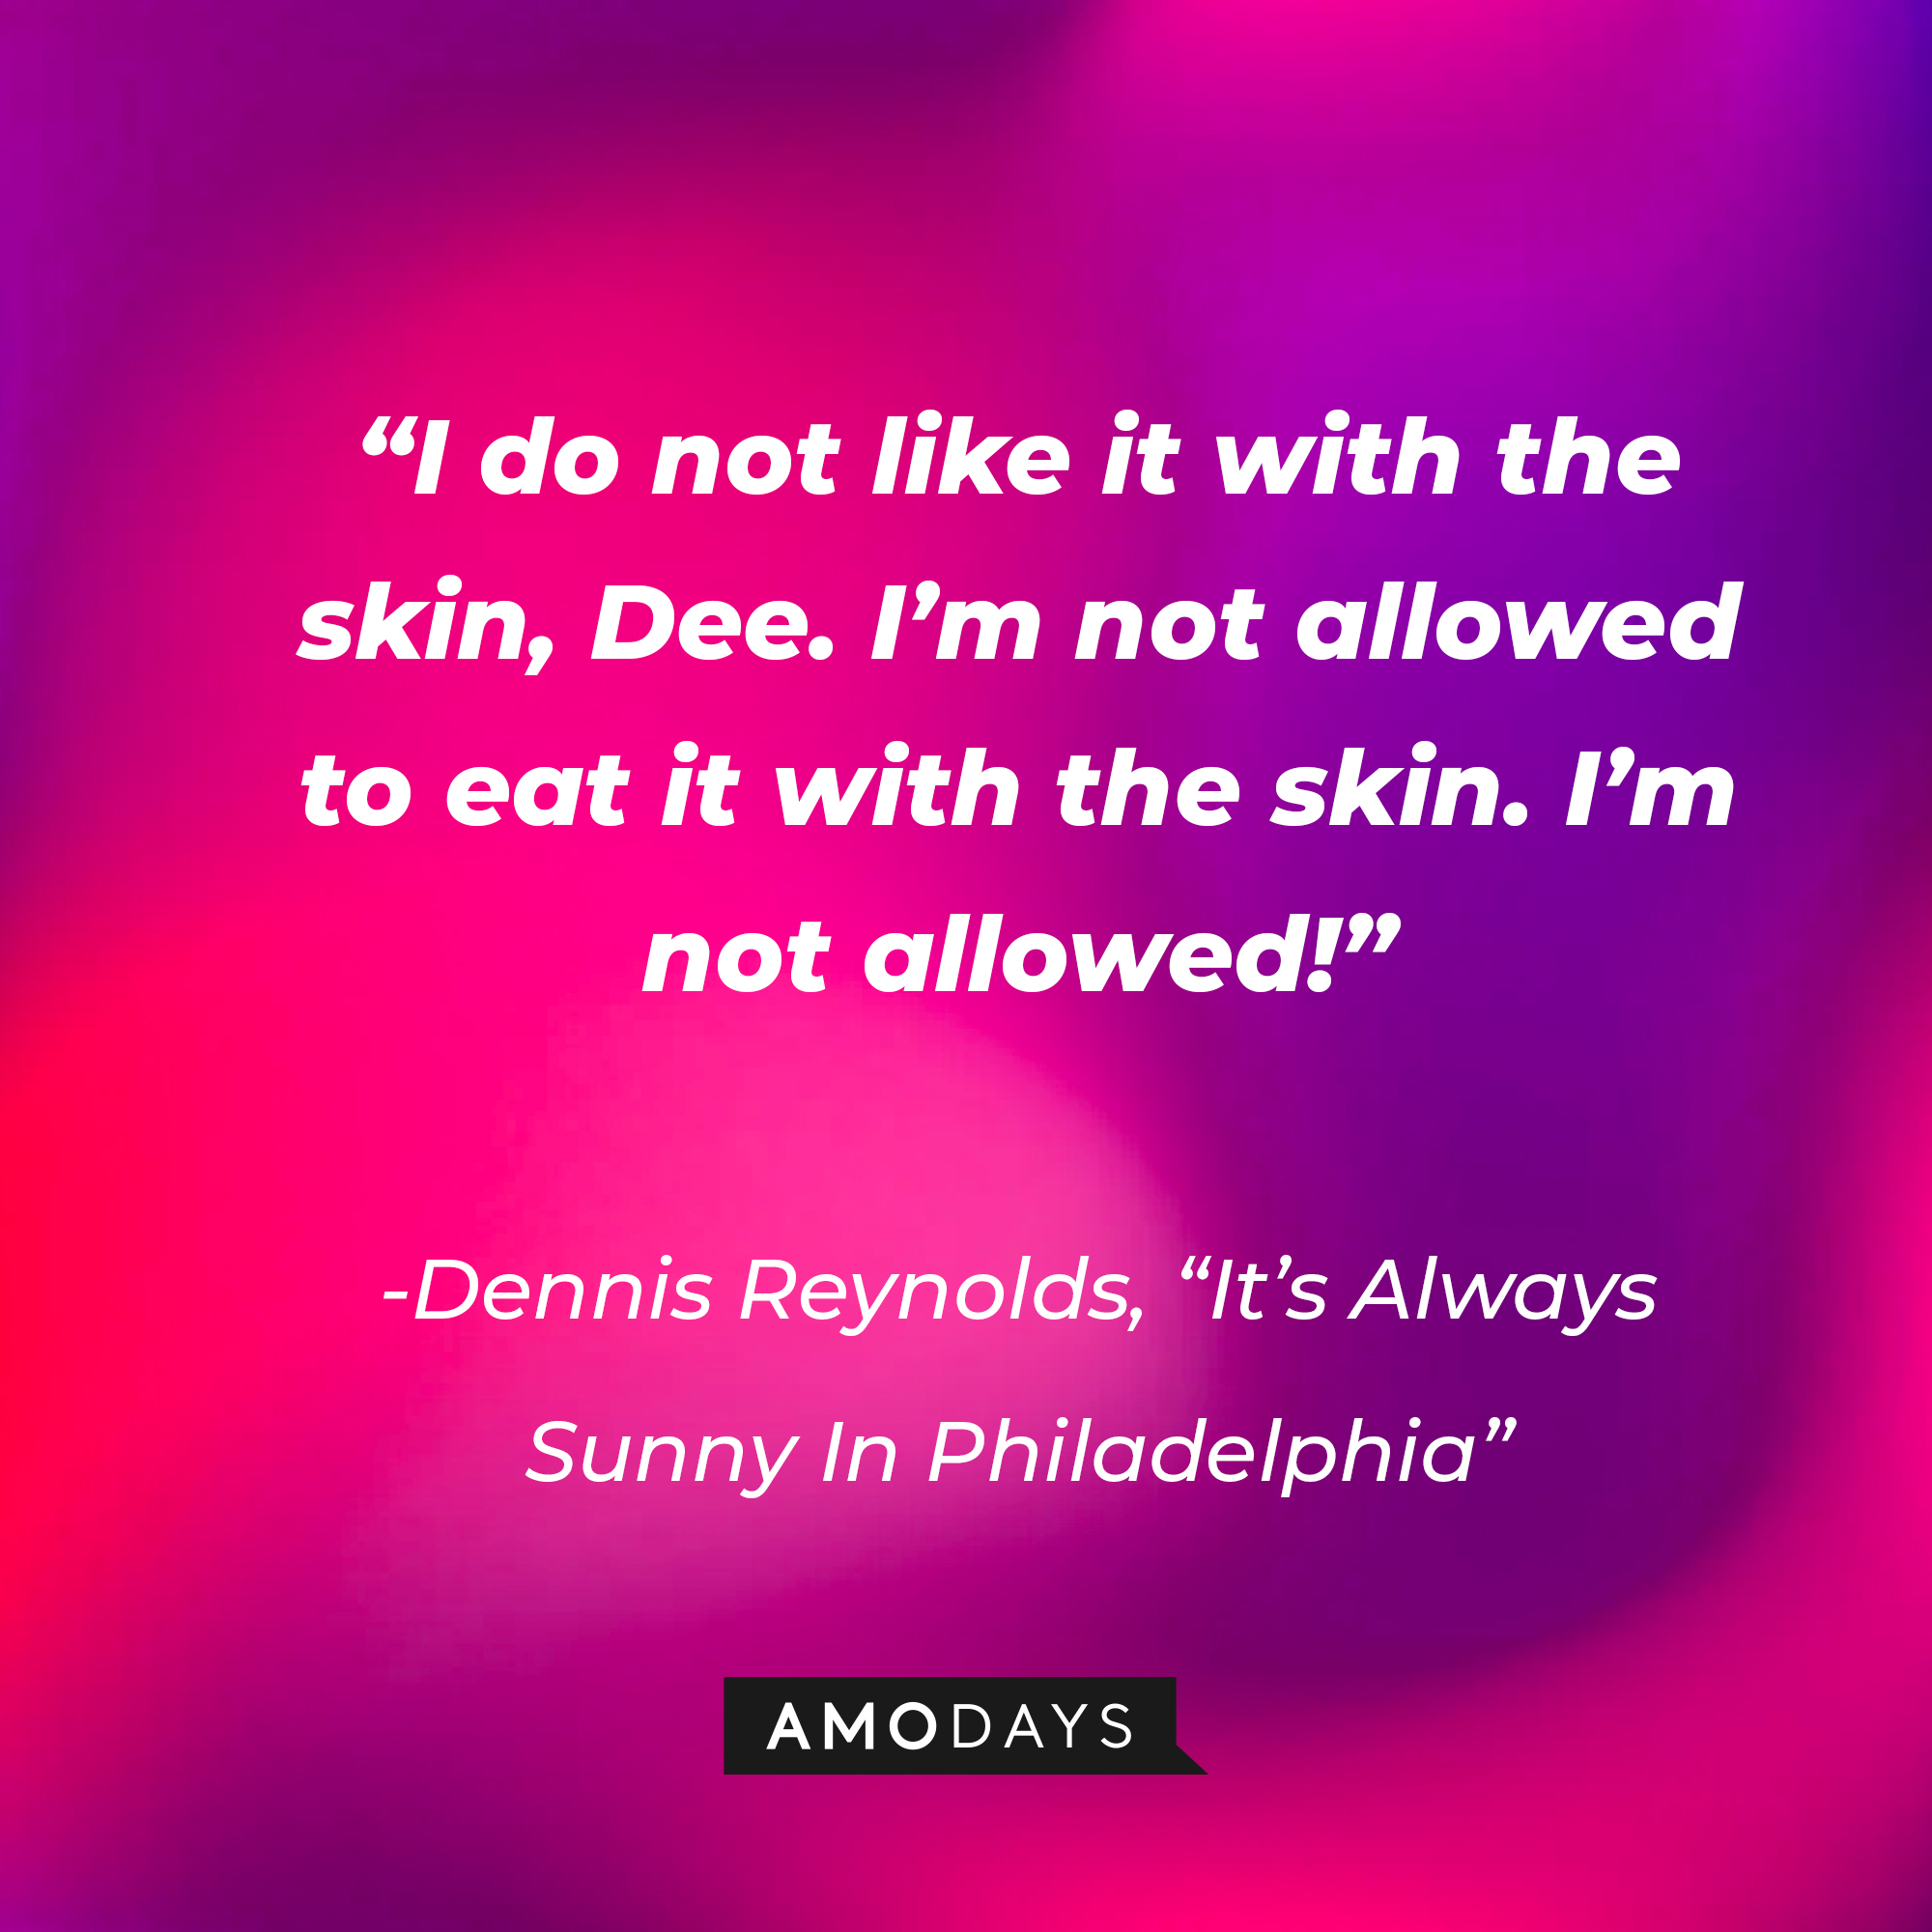 Dennis Reynolds’ quote from "It's Always Sunny In Philadelphia": “I do not like it with the skin, Dee. I’m not allowed to eat it with the skin. I’m not allowed!” | Source: AmoDays